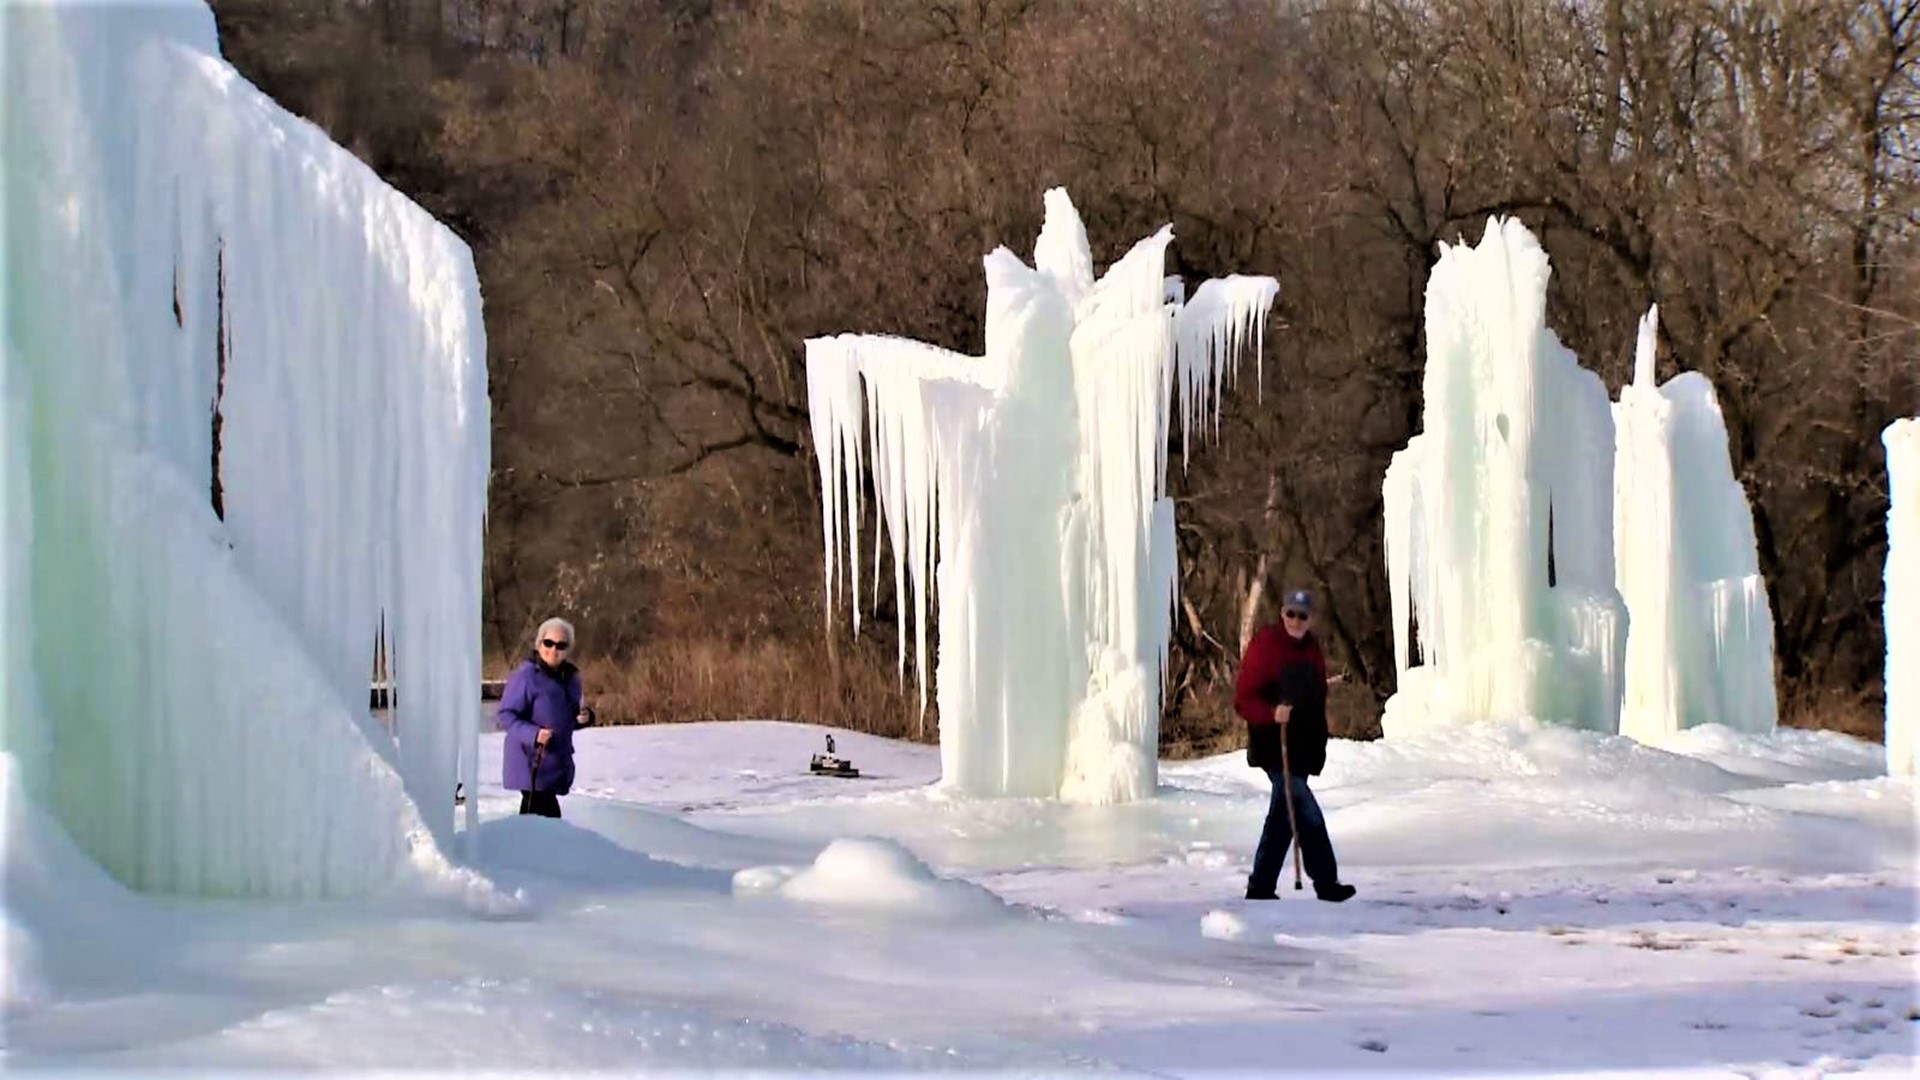 Roger Nelson has created more than 30 ice sculptures - with an assist from Mother Nature